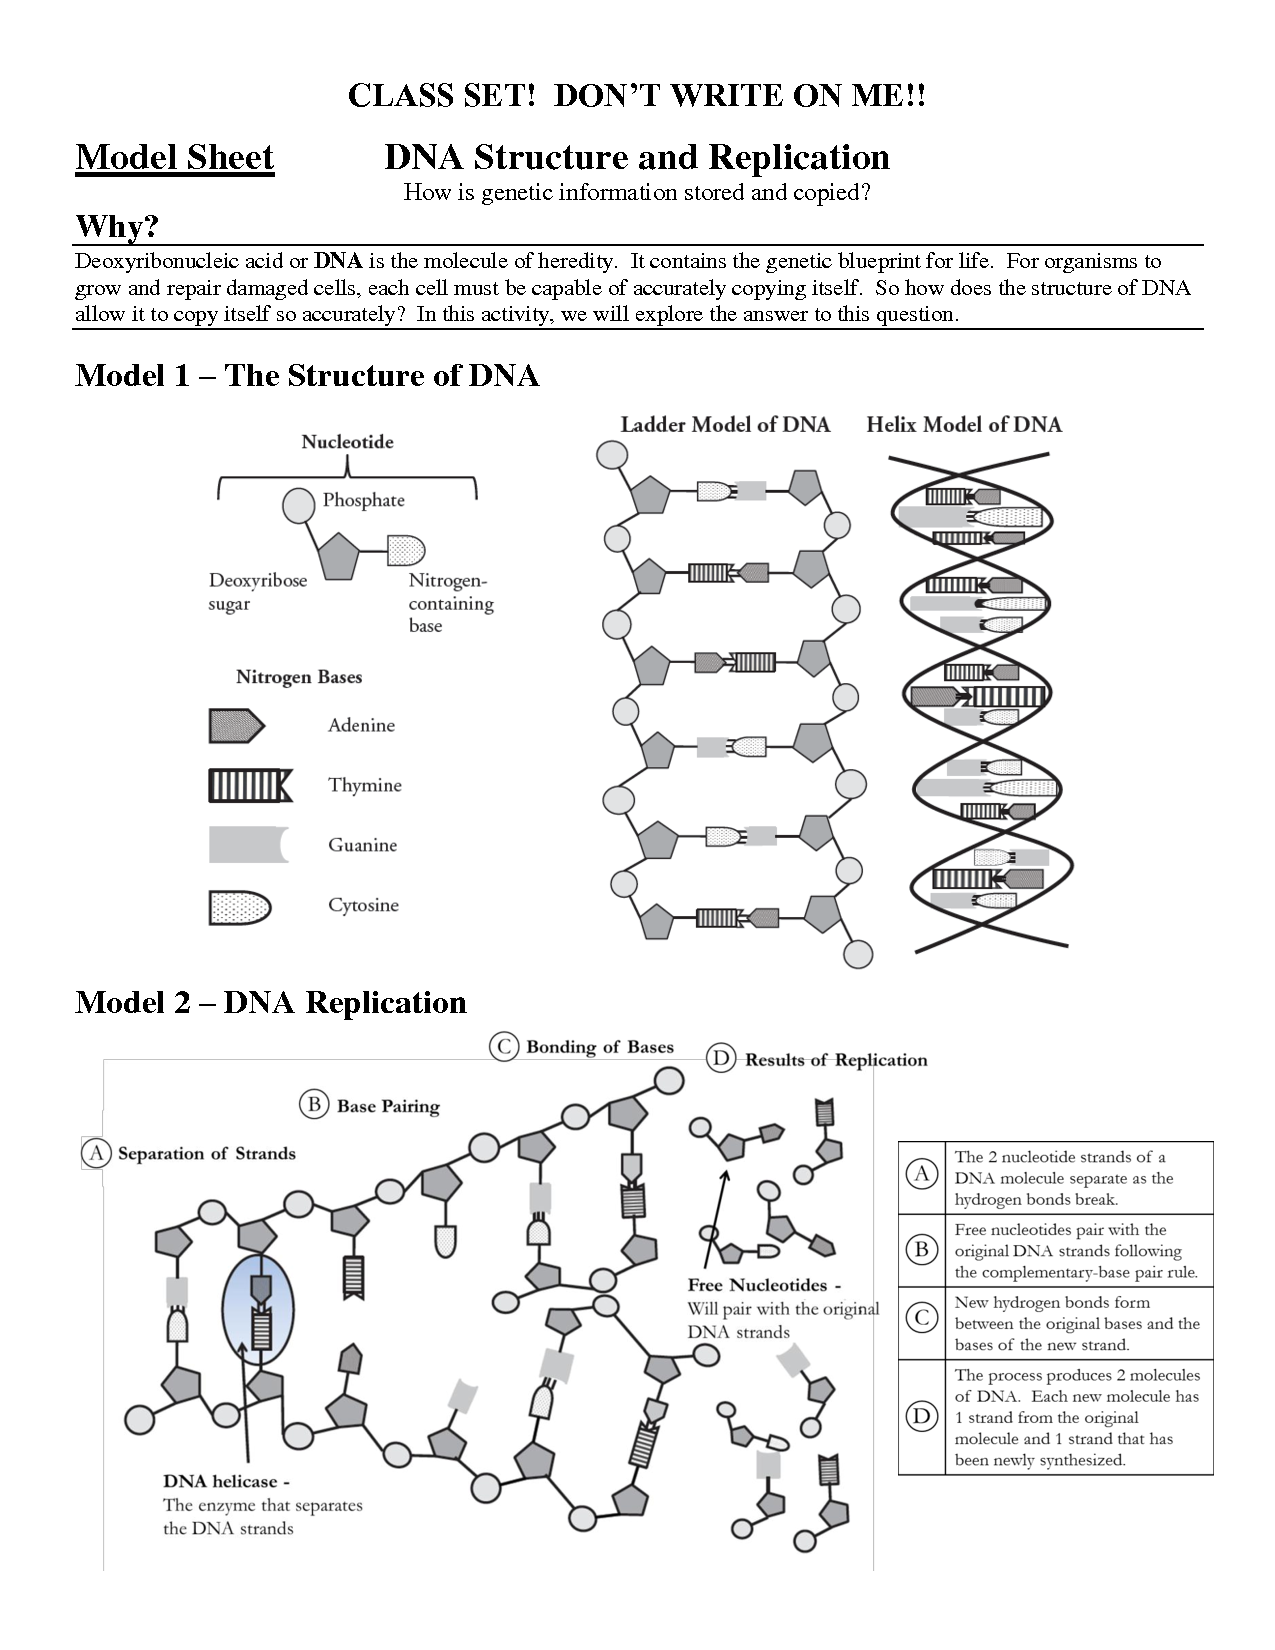 DNA Structure and Replication Worksheet Answer Key Image